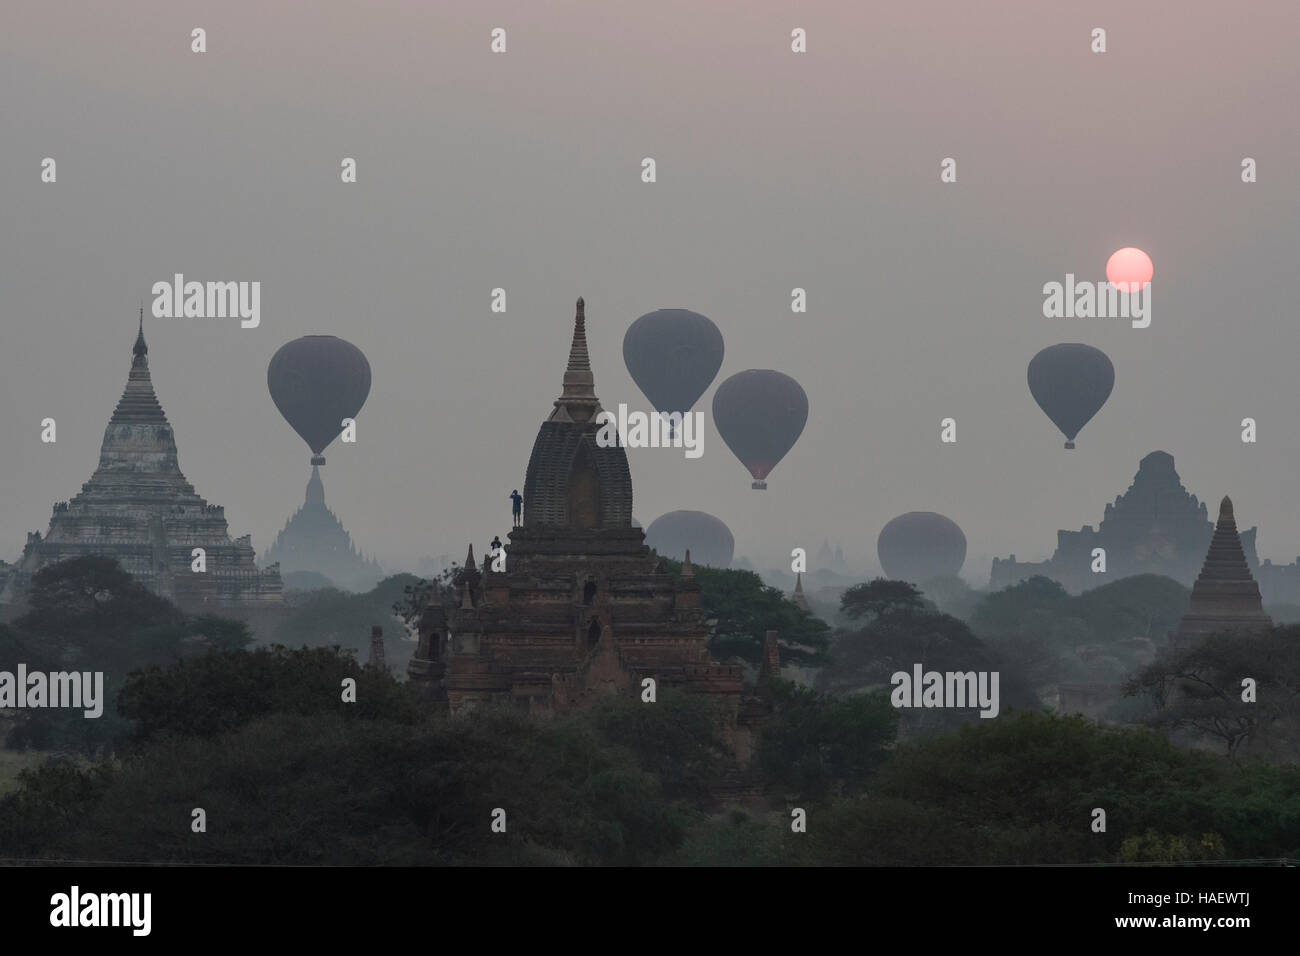 Silhouette of Hot air Balloons flying over the temples of Bagan Historical site, Myanmar. Stock Photo